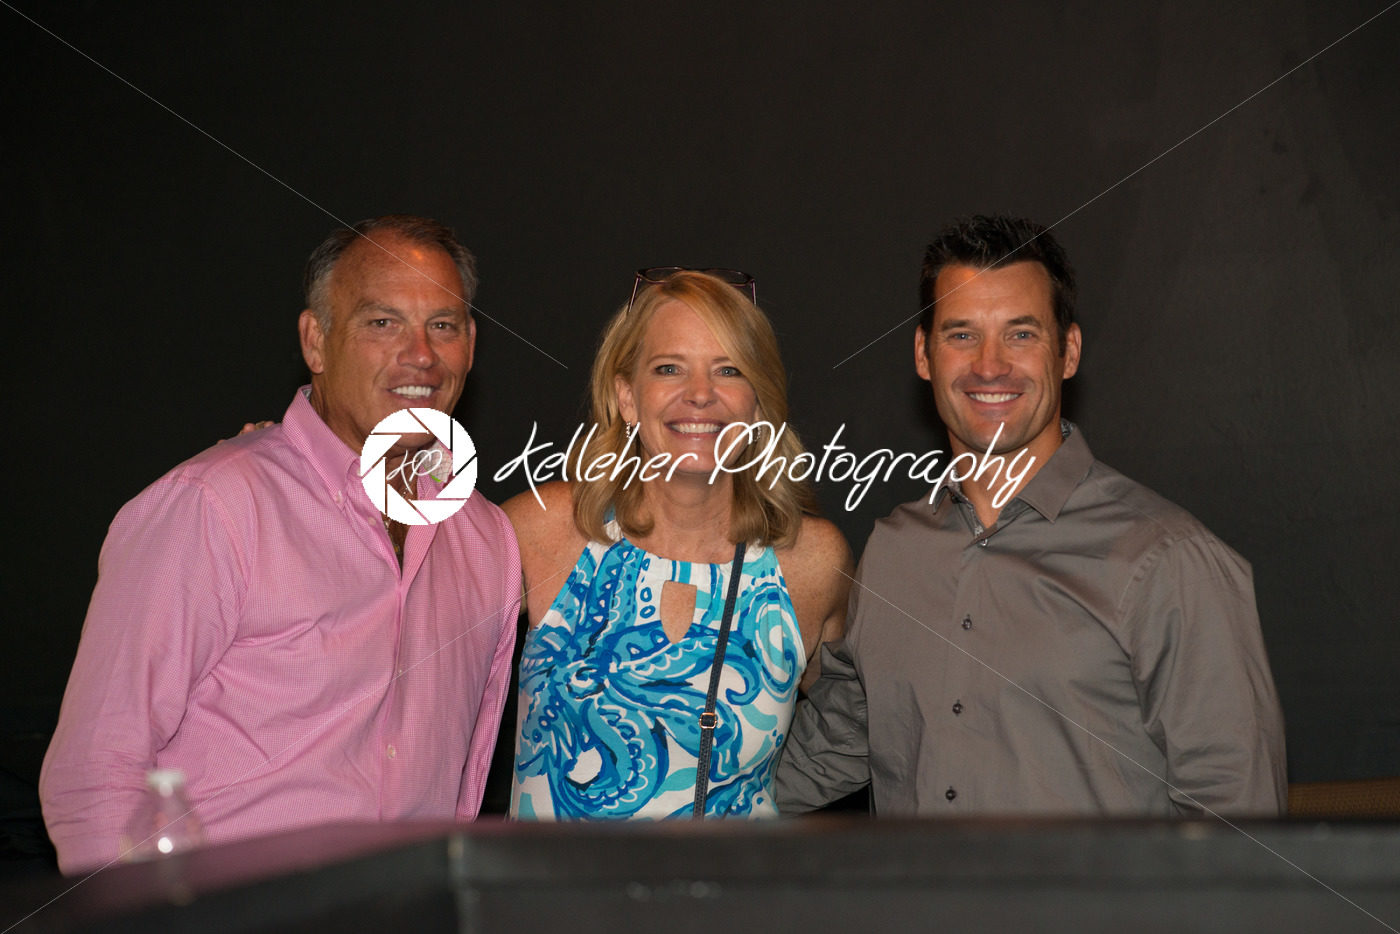 VALLEY FORGE CASINO, KING OF PRUSSIA, PA – JUKY 15: Leslie Gudel at Kendall’s Crusade fundraising event on July 15, 2017 - Kelleher Photography Store